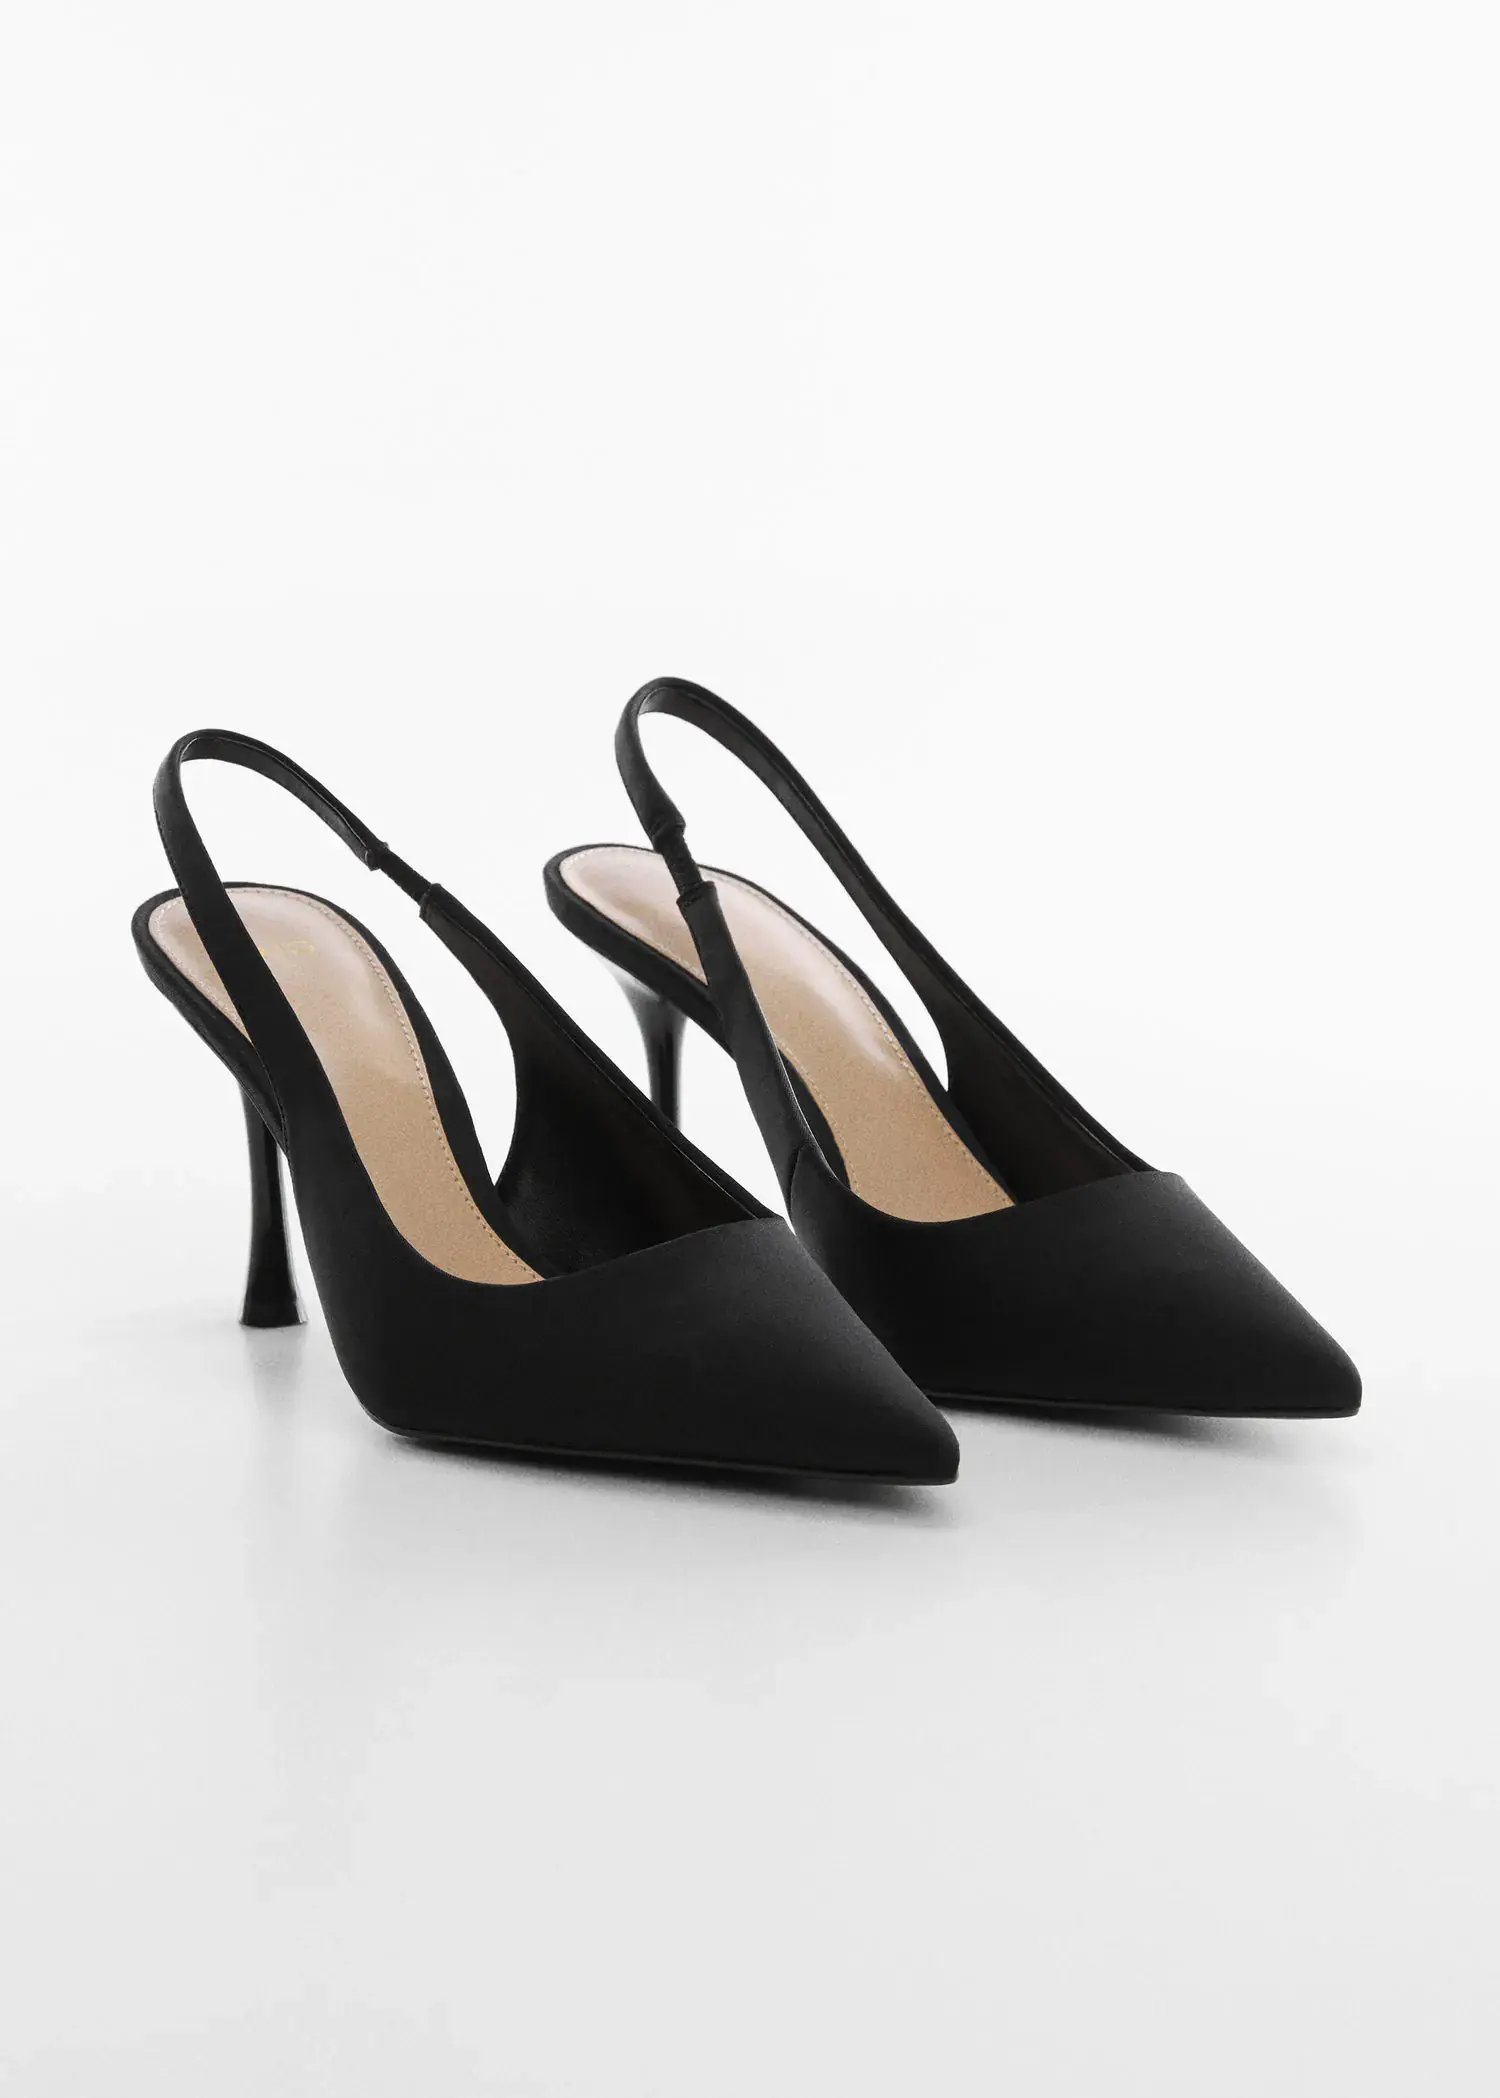 Mango High-heeled shoes. a pair of black high heels on a white surface. 